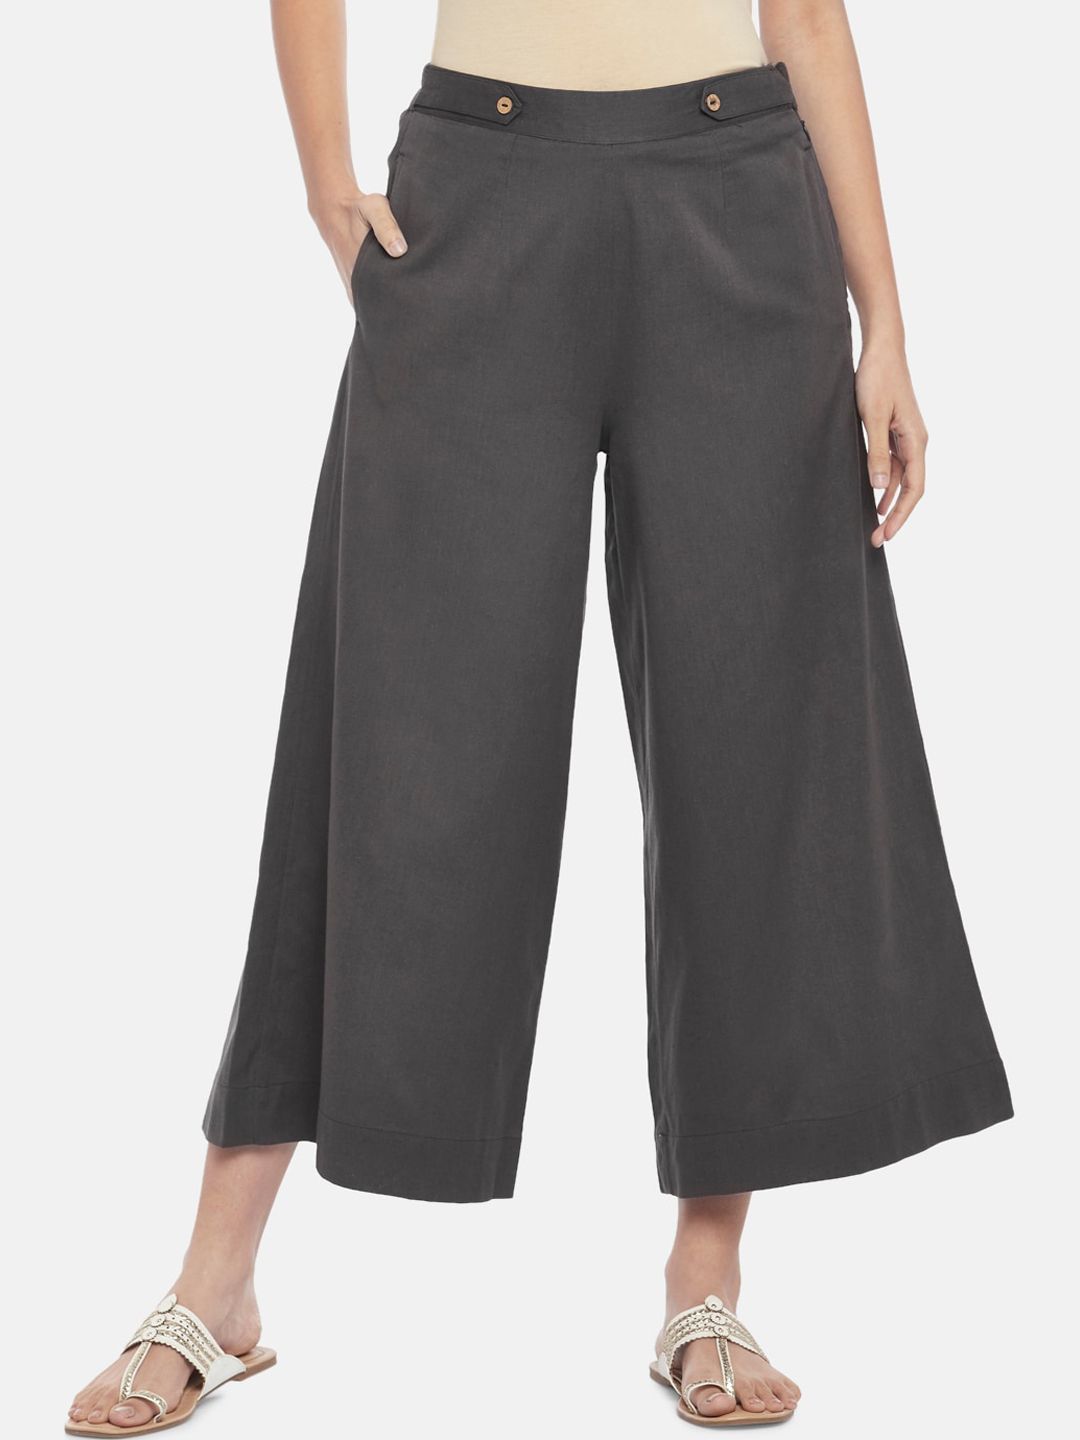 AKKRITI BY PANTALOONS Women Grey Culottes Trousers Price in India